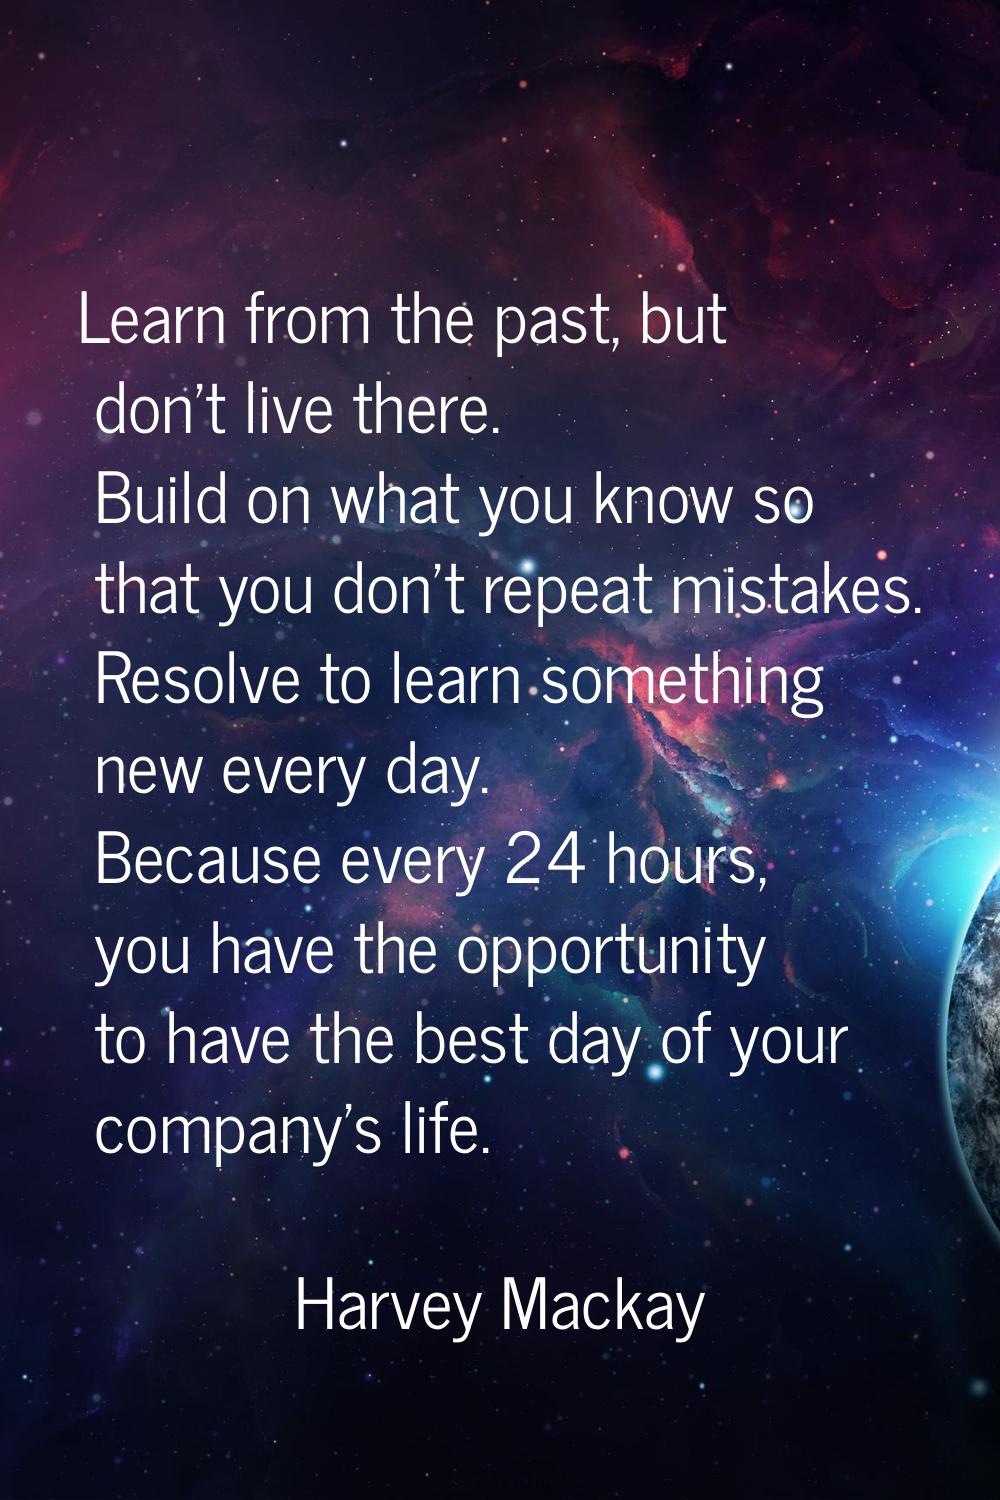 Learn from the past, but don't live there. Build on what you know so that you don't repeat mistakes